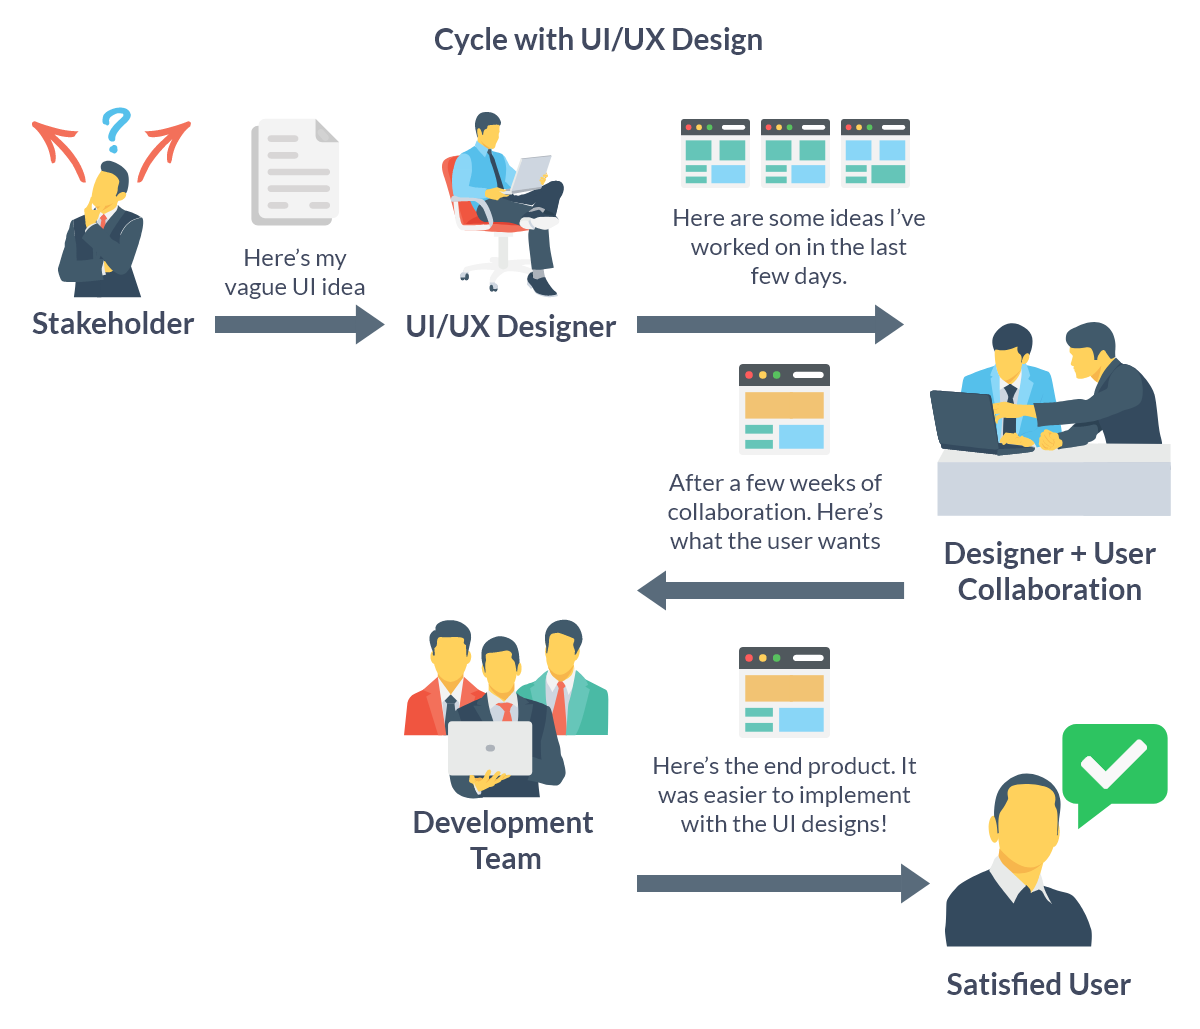 Cycle with UI/UX Design, users can be taken into consideration from the very beginning, reducing the chances of disatisfaction for users in the end.